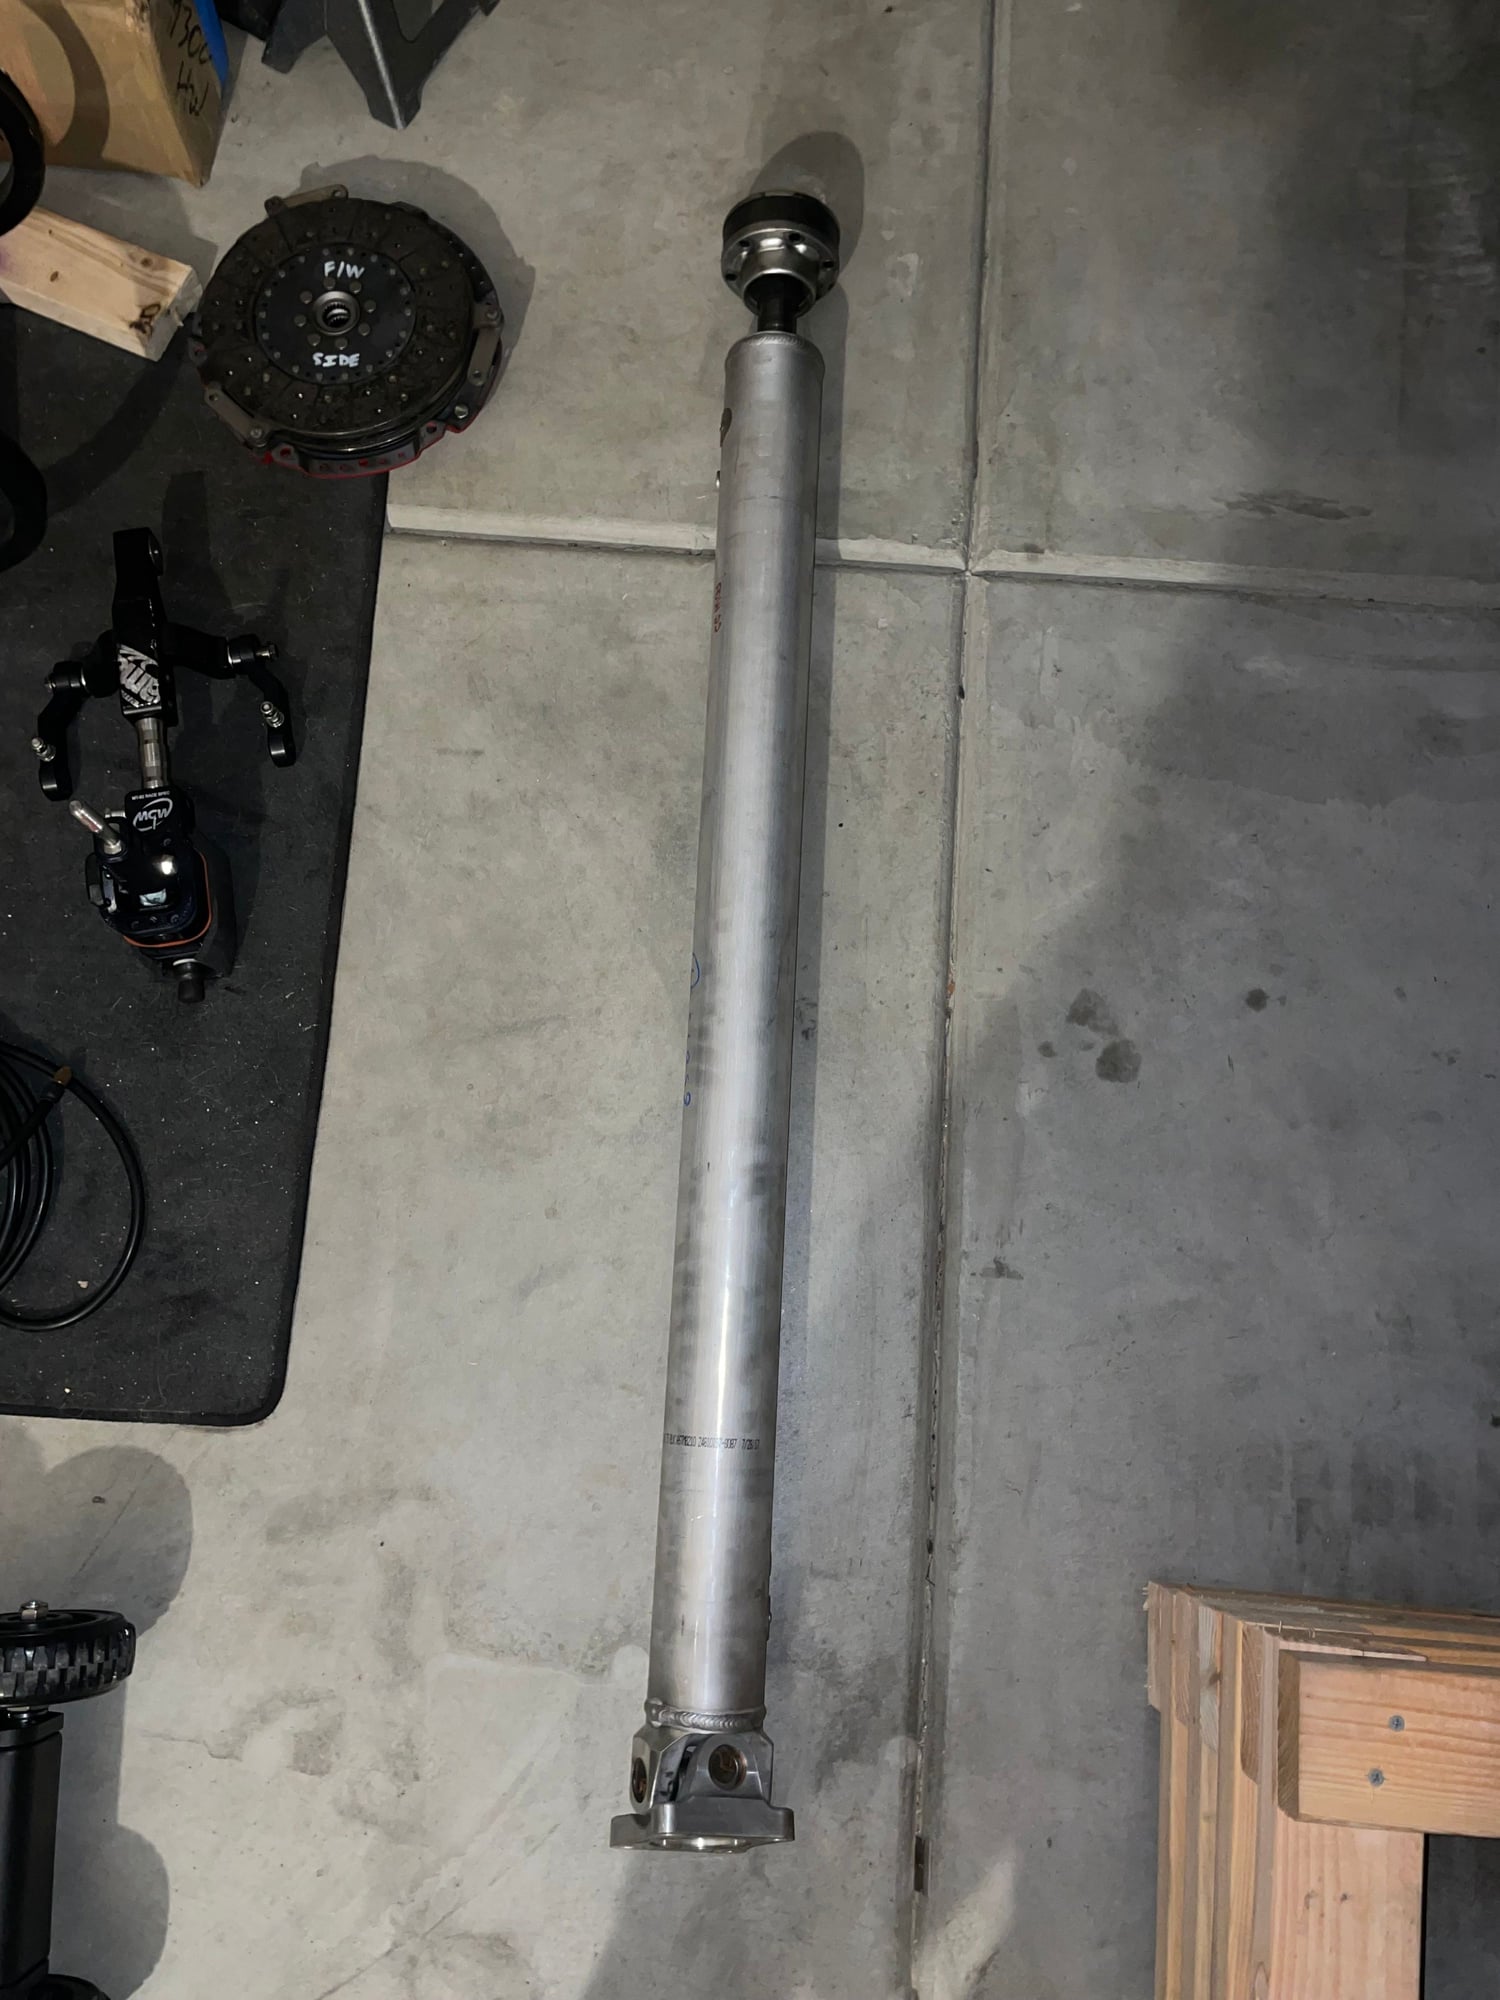 Drivetrain - Driveshaft Shop Aluminum Dirveshaft - Used - 2011 to 2014 Ford Mustang - Beaumont, CA 92223, United States